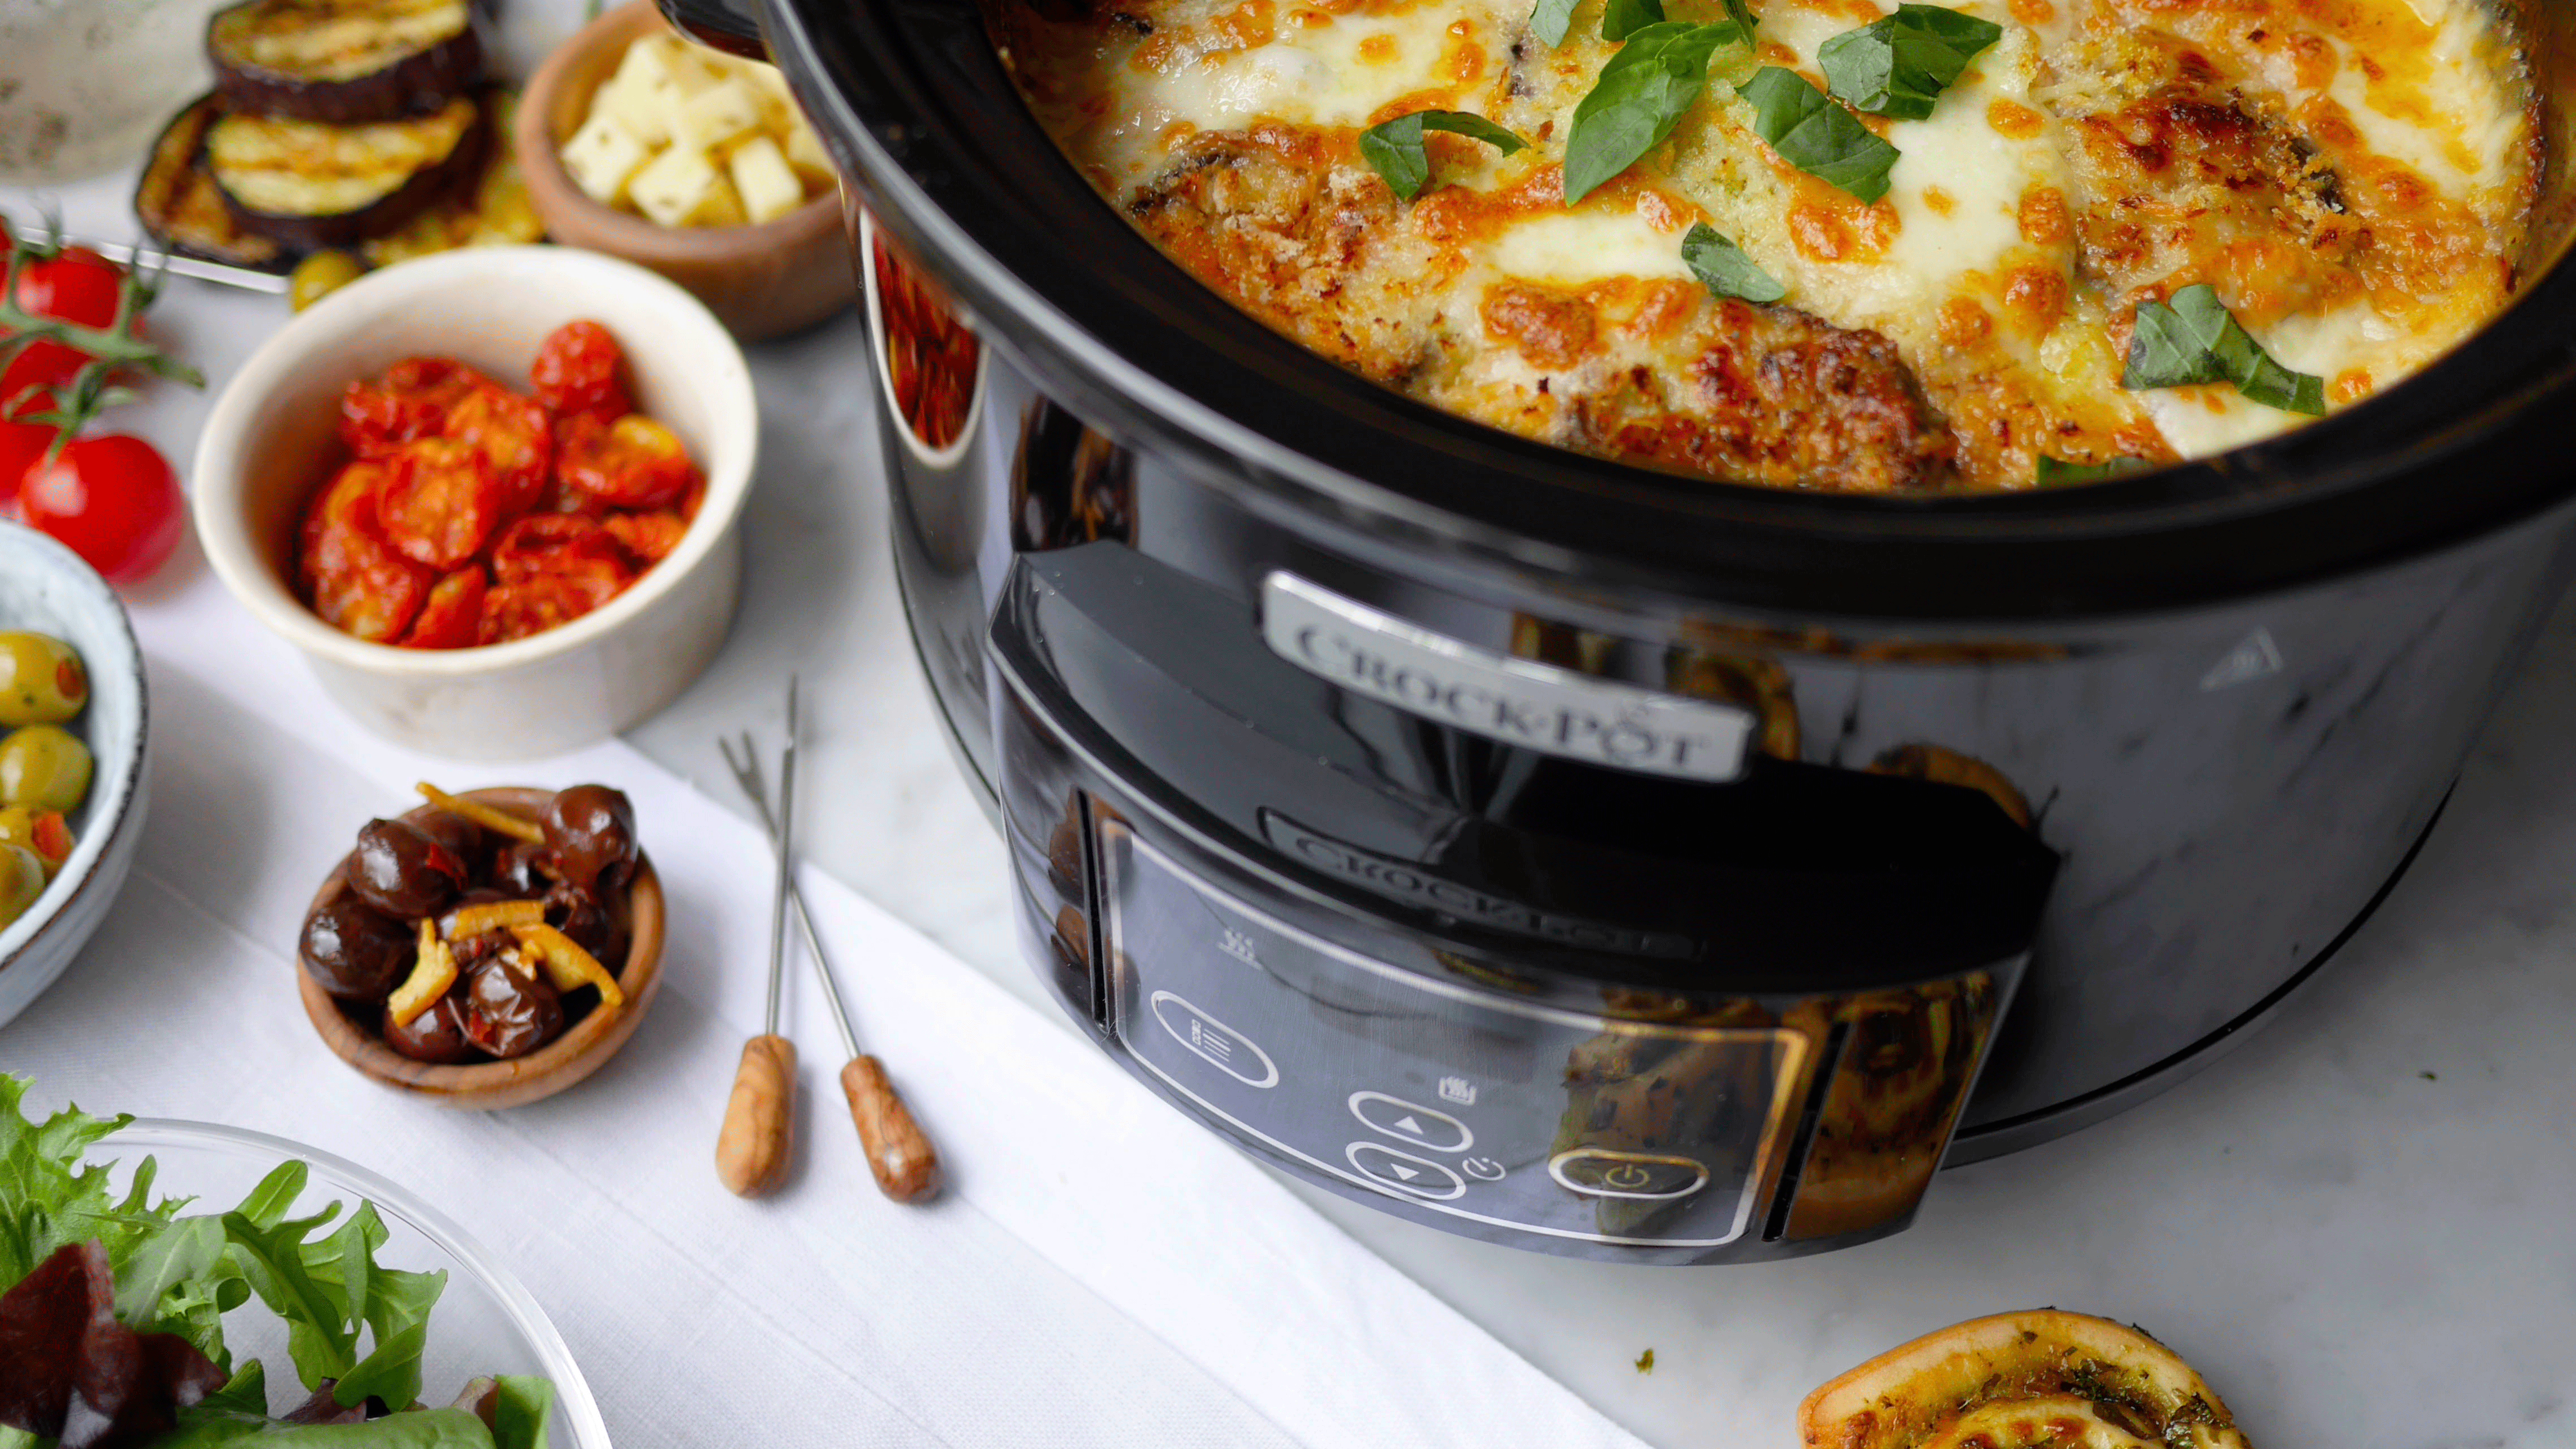 The best slow cookers to buy this weekend